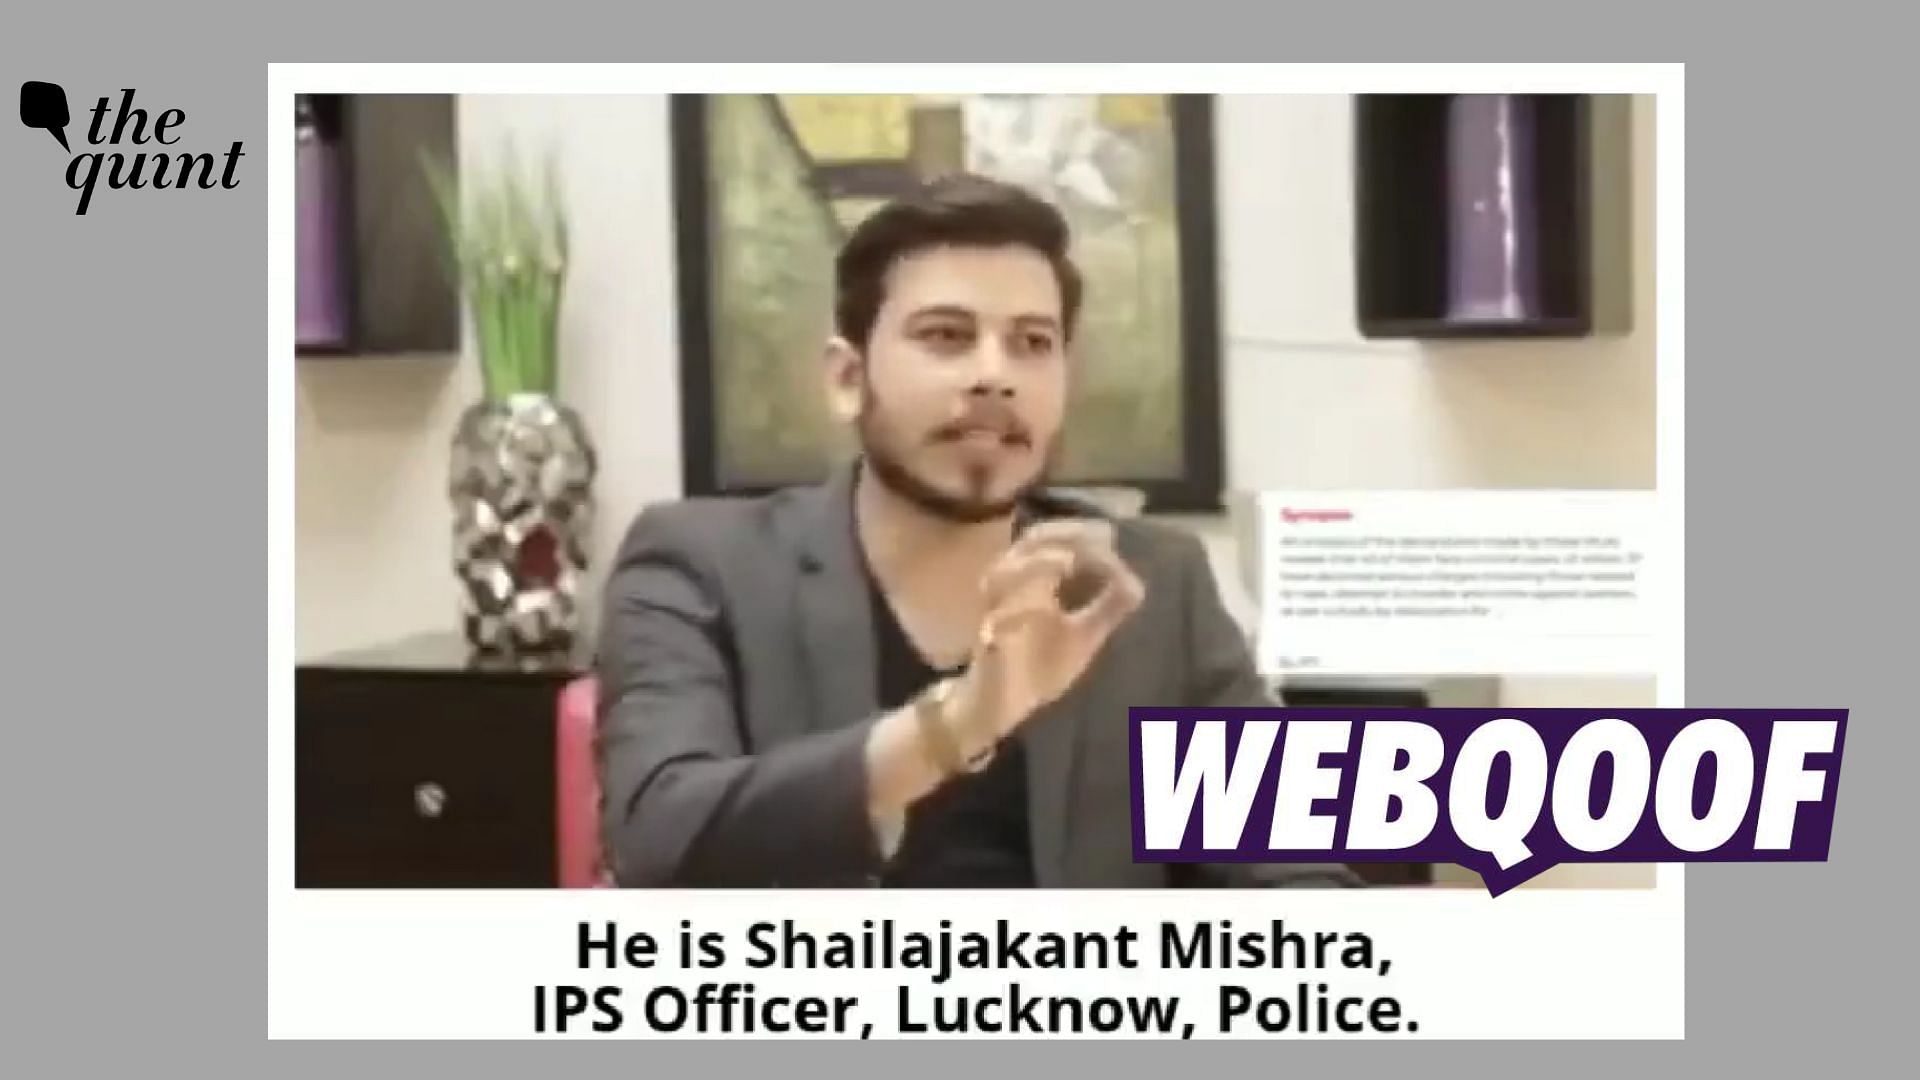 <div class="paragraphs"><p>The claim suggests that the person speaking in the video about the criminalisation of politics is an IPS Officer from Lucknow.</p></div>